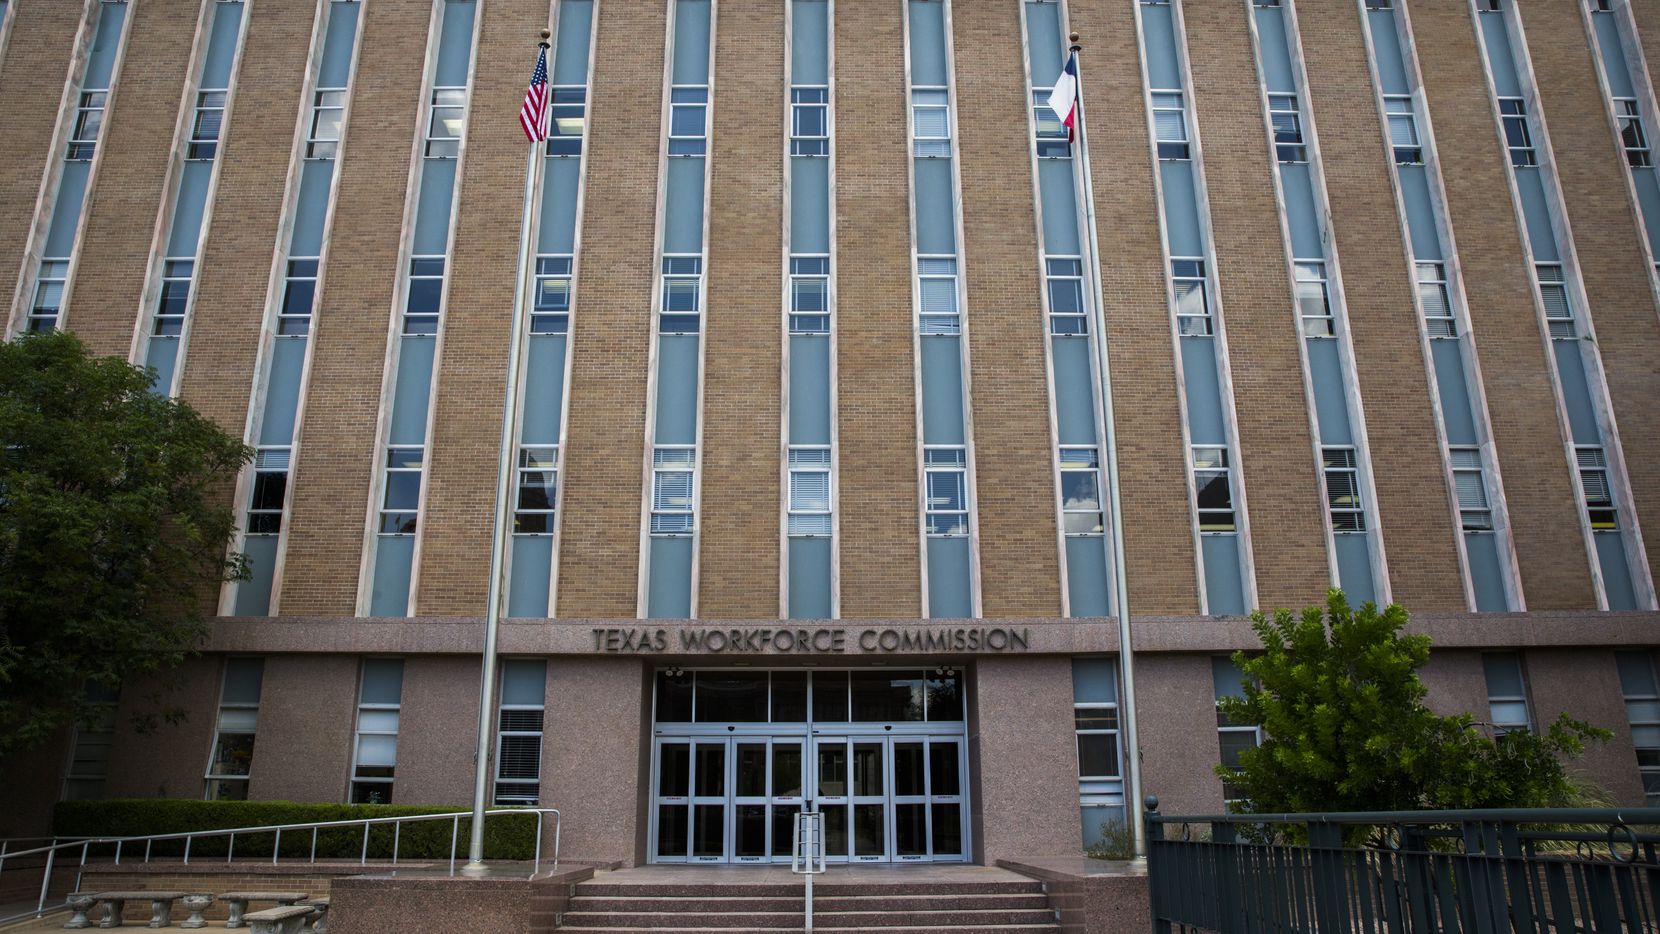 The Texas Workforce Commission building on Wednesday, July 19, 2017 near the Texas state...